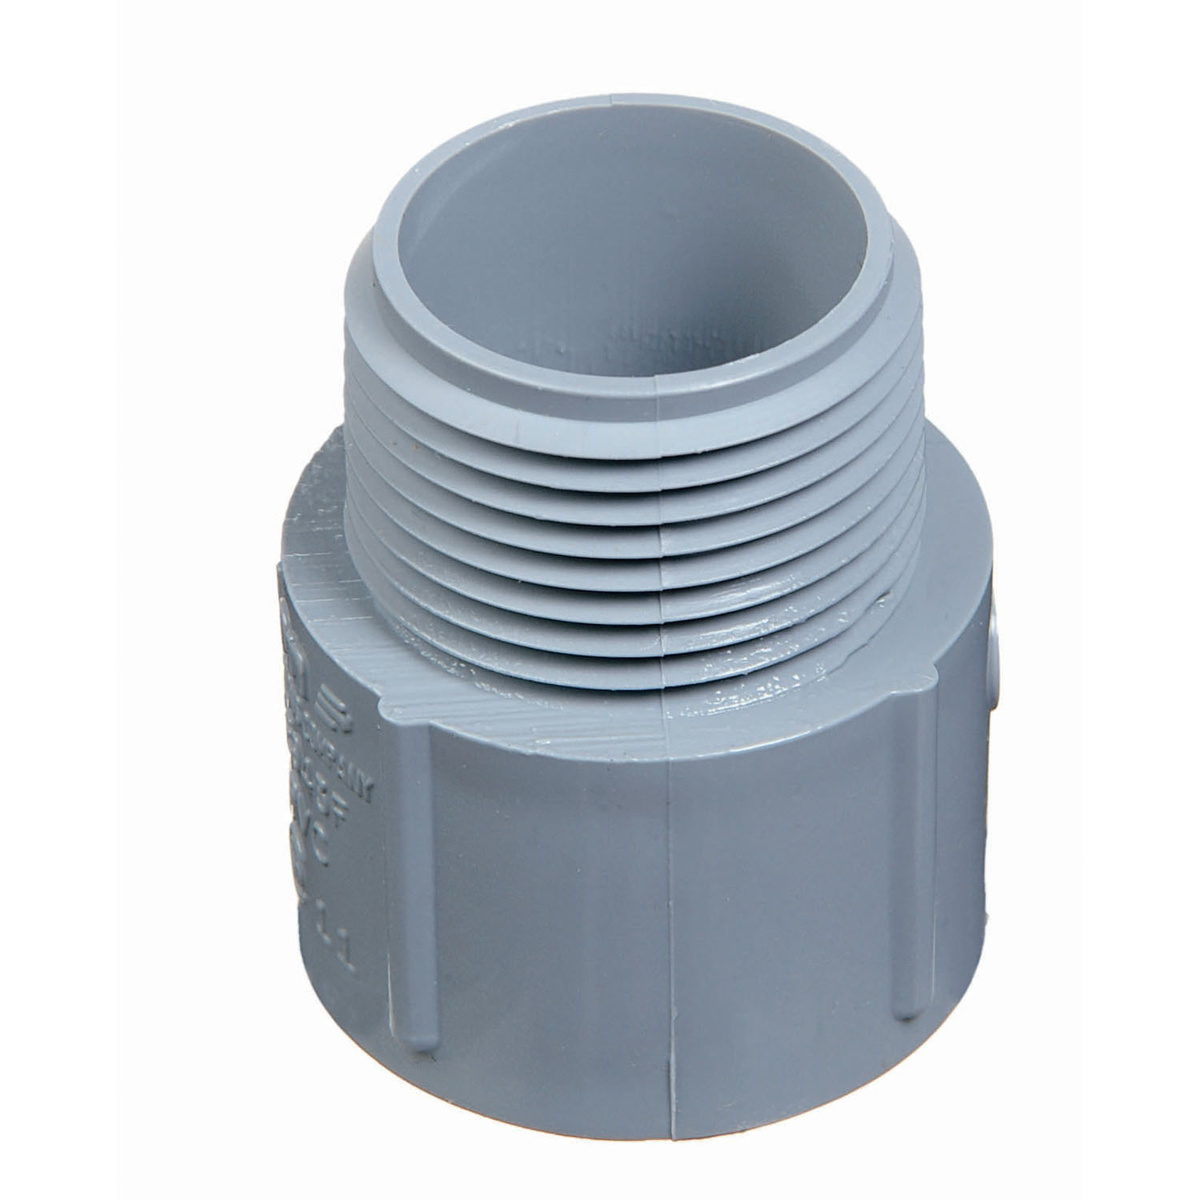 ABB Male Terminal Adapter PVC Sch 40 and 80 2 in Threaded Socket from Columbia Safety